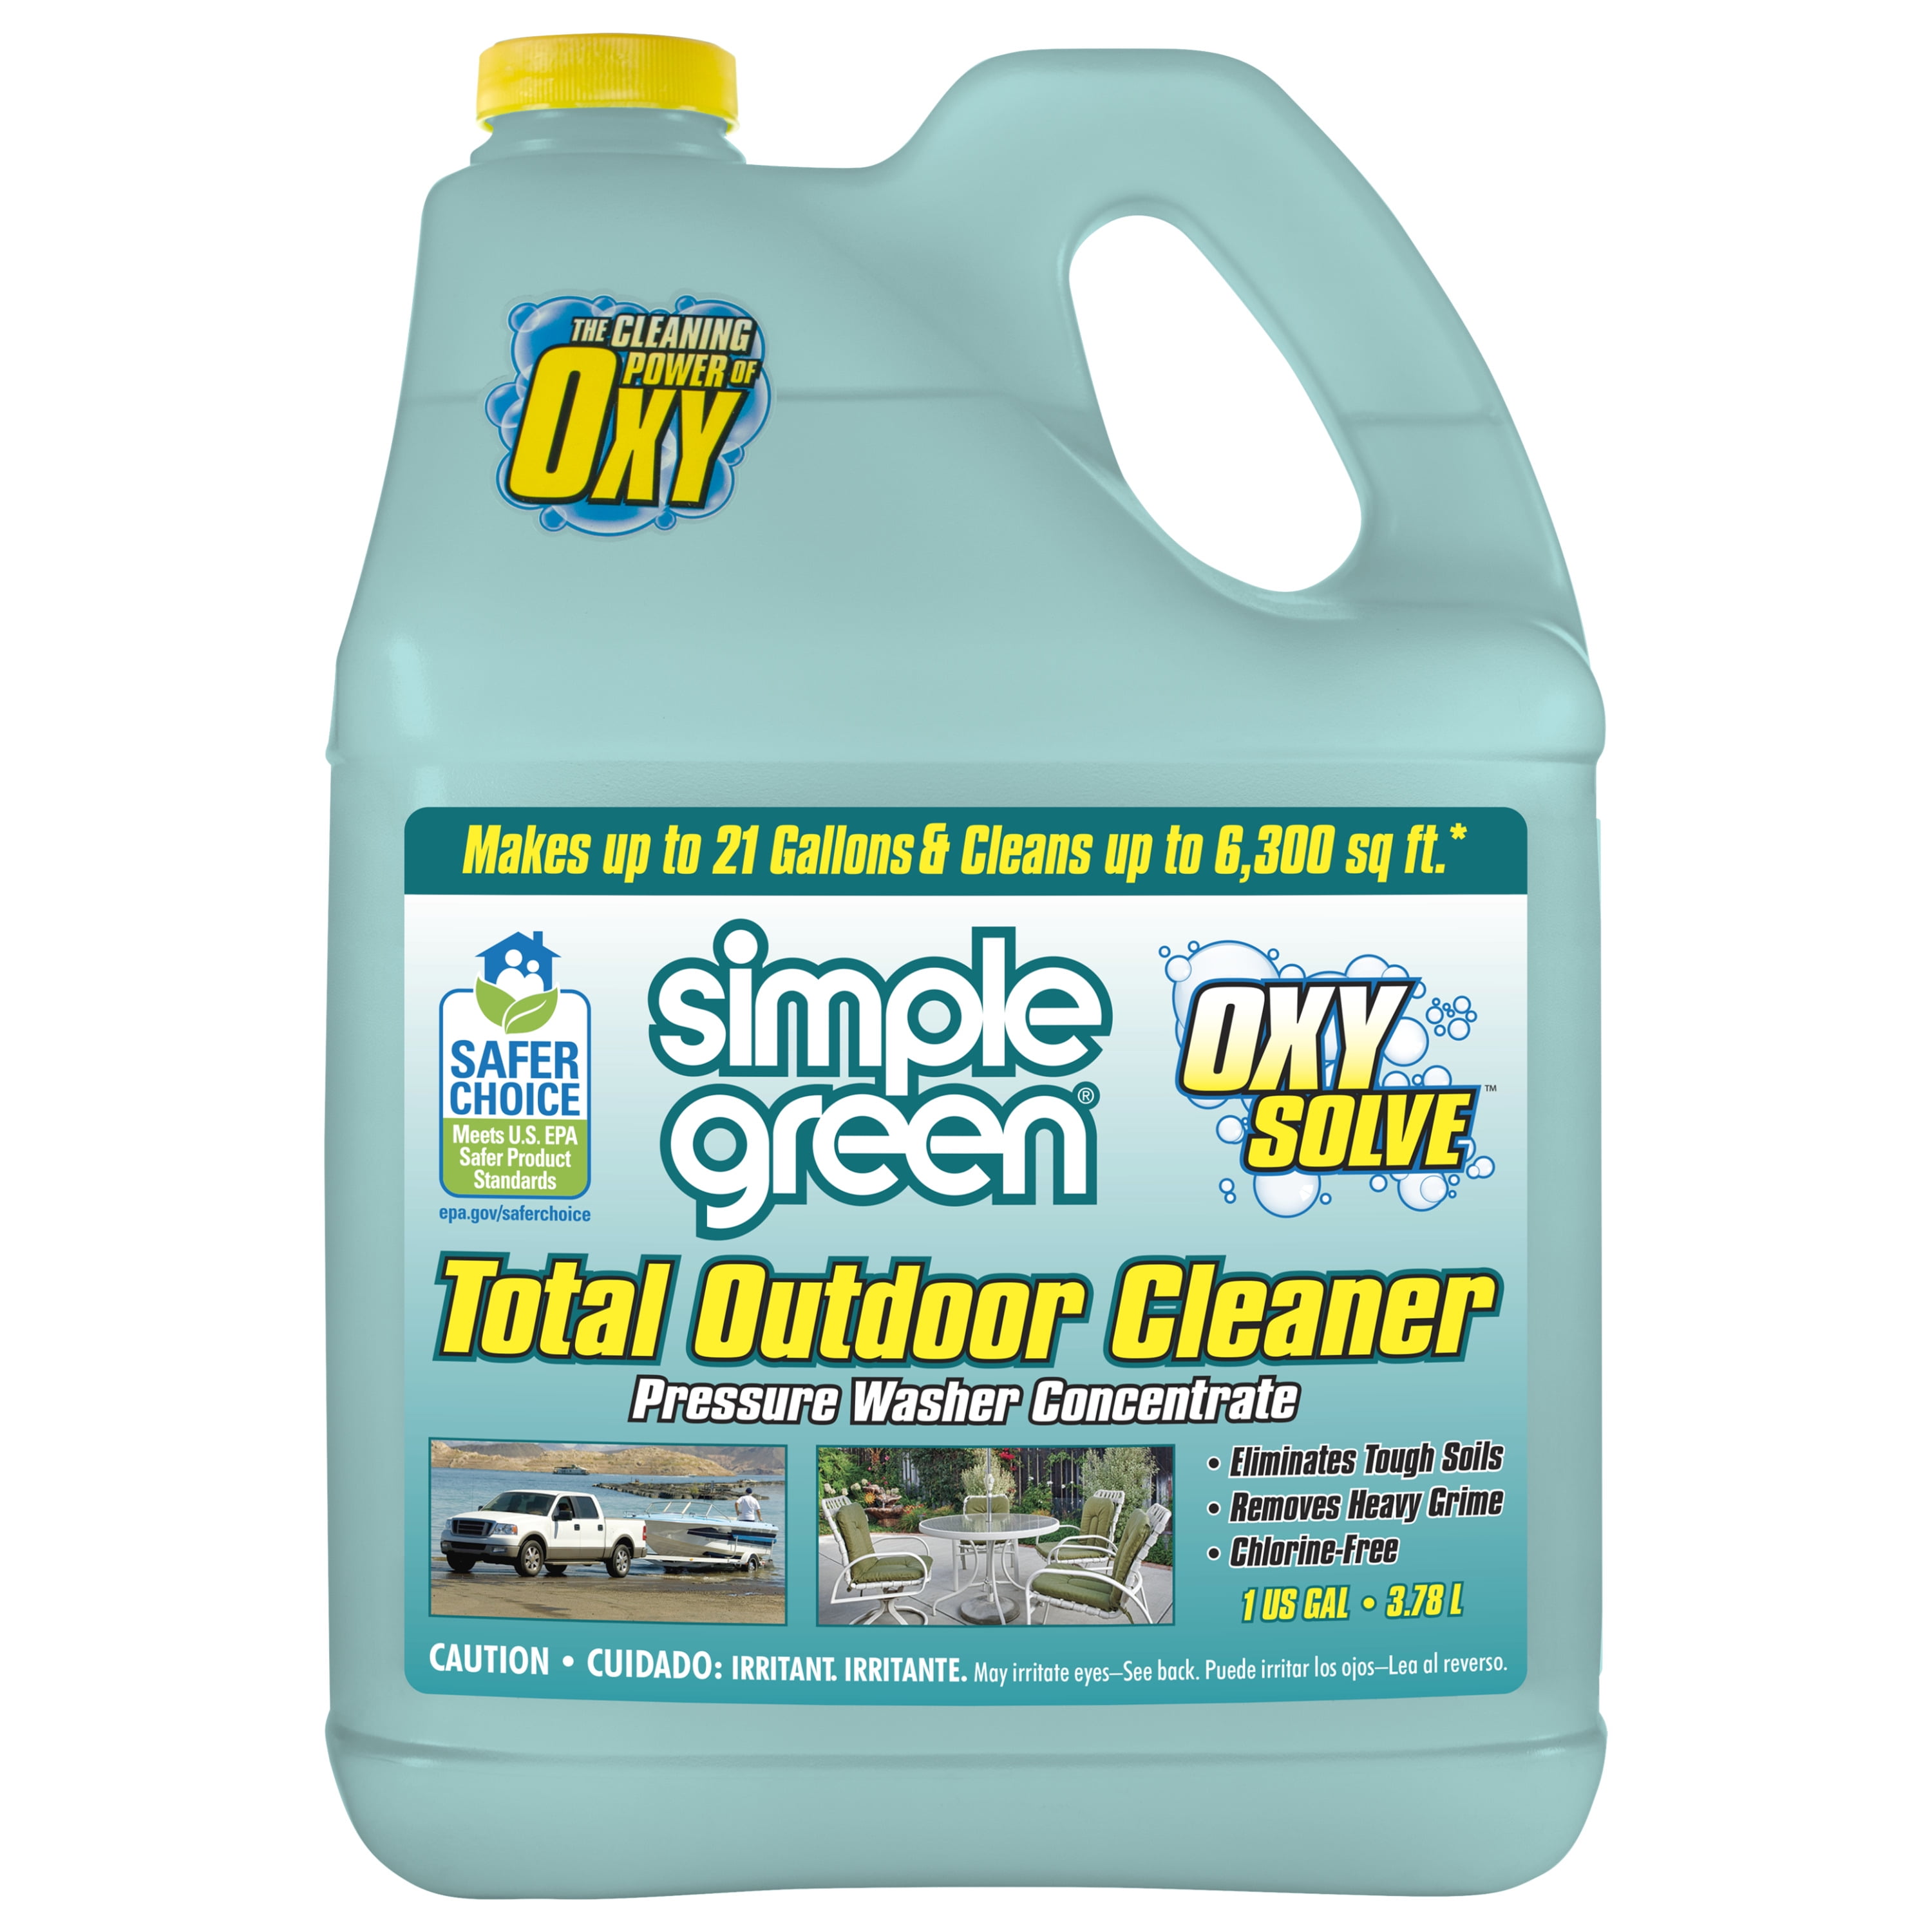 Ready-to-Use or Concentrated Pressure Washer Cleaners